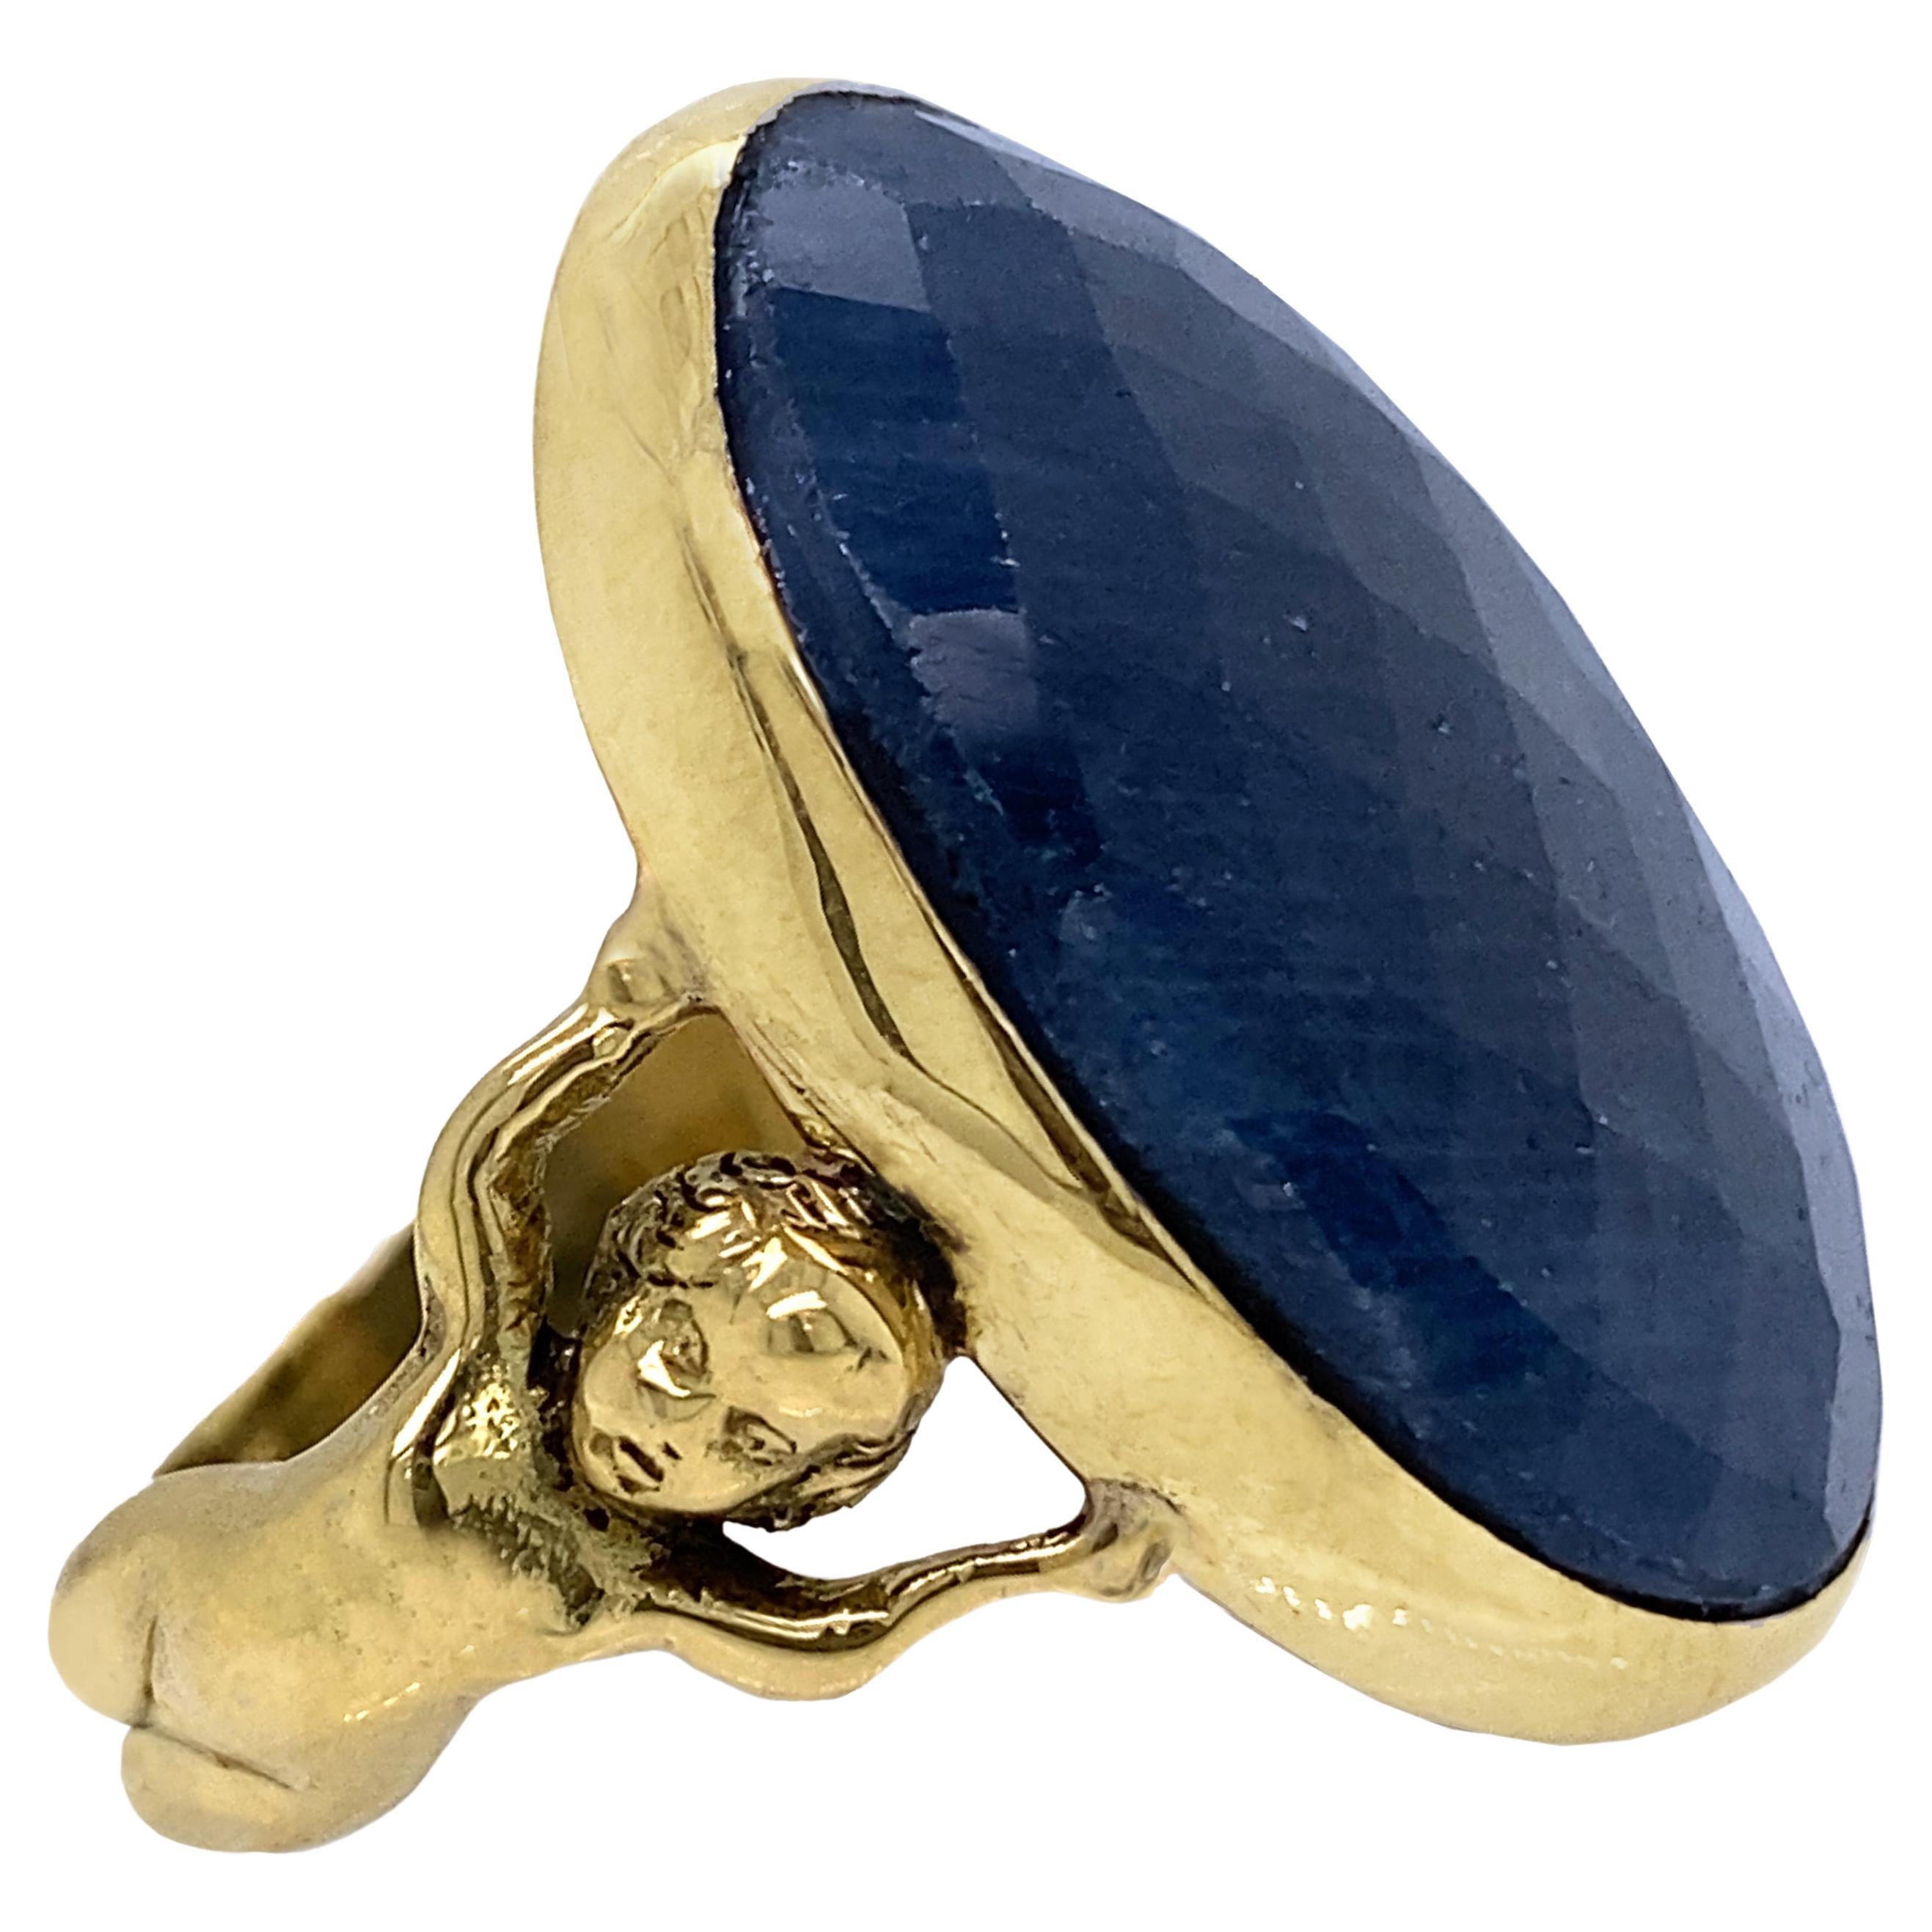 Cherub Figural Solitaire Ring with Rose Cut Sapphire in 18 Karat Yellow Gold